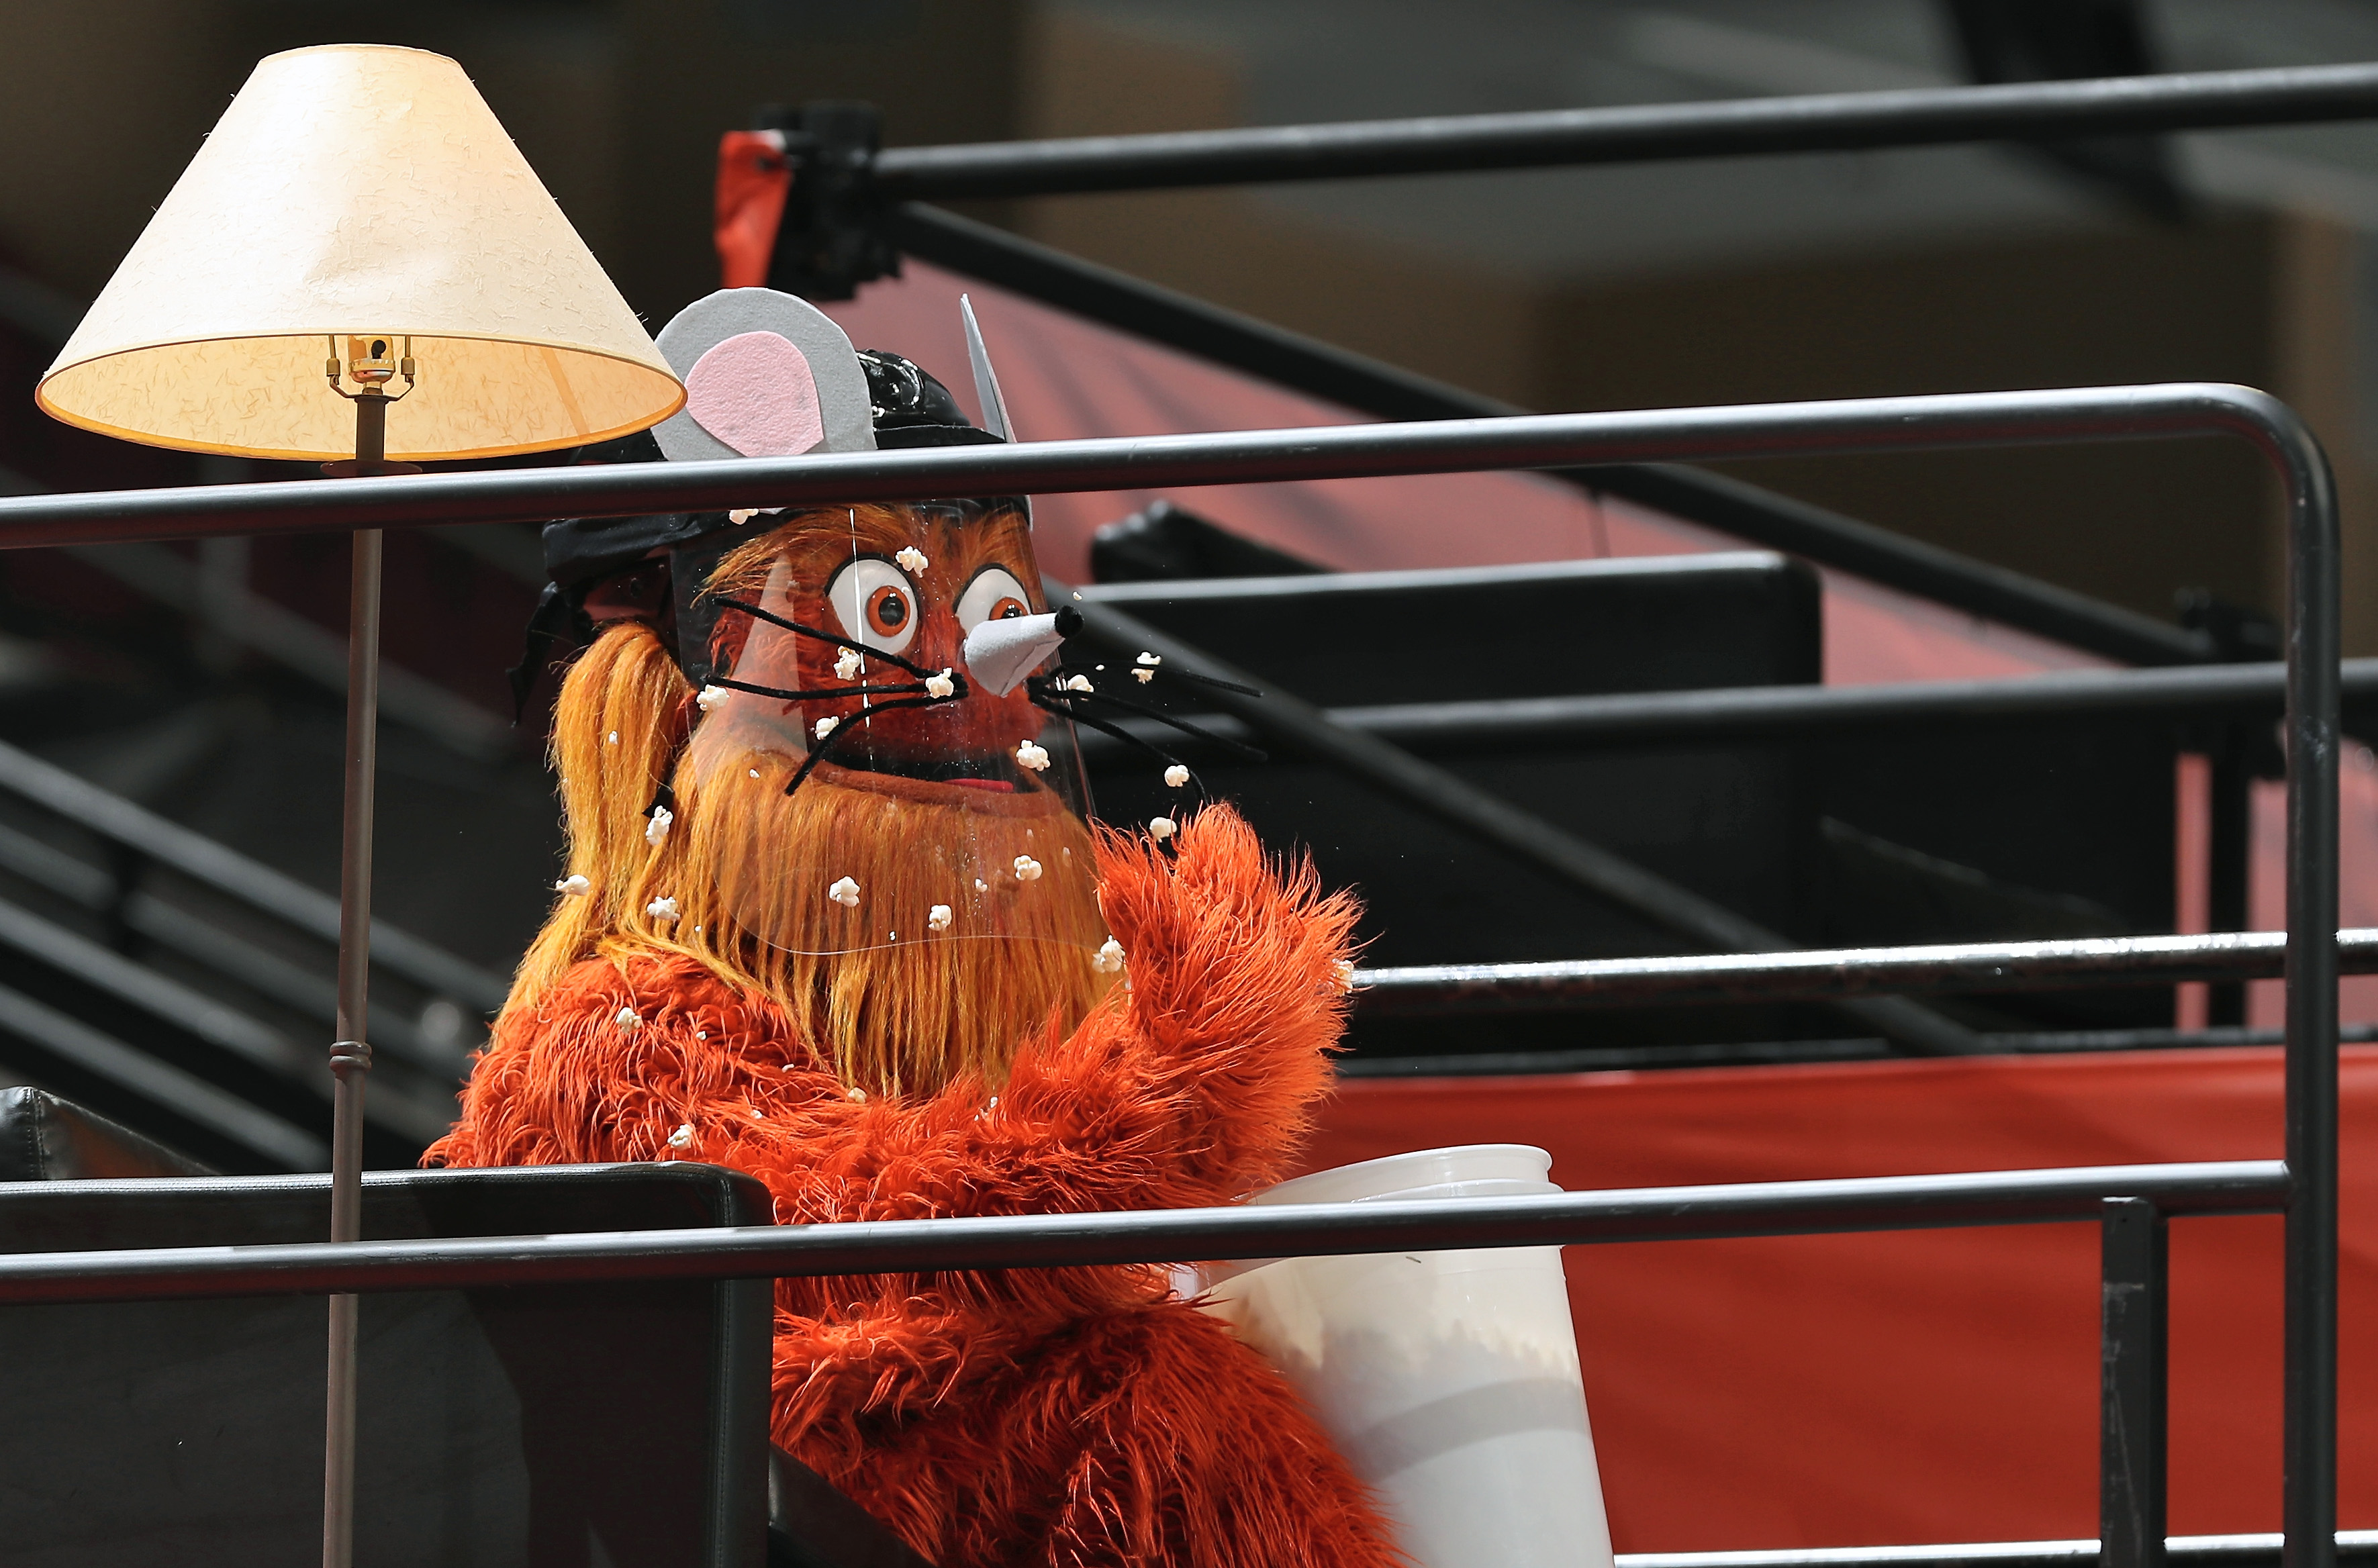 gritty the flyers mascot with a face shield and popcorn on his face